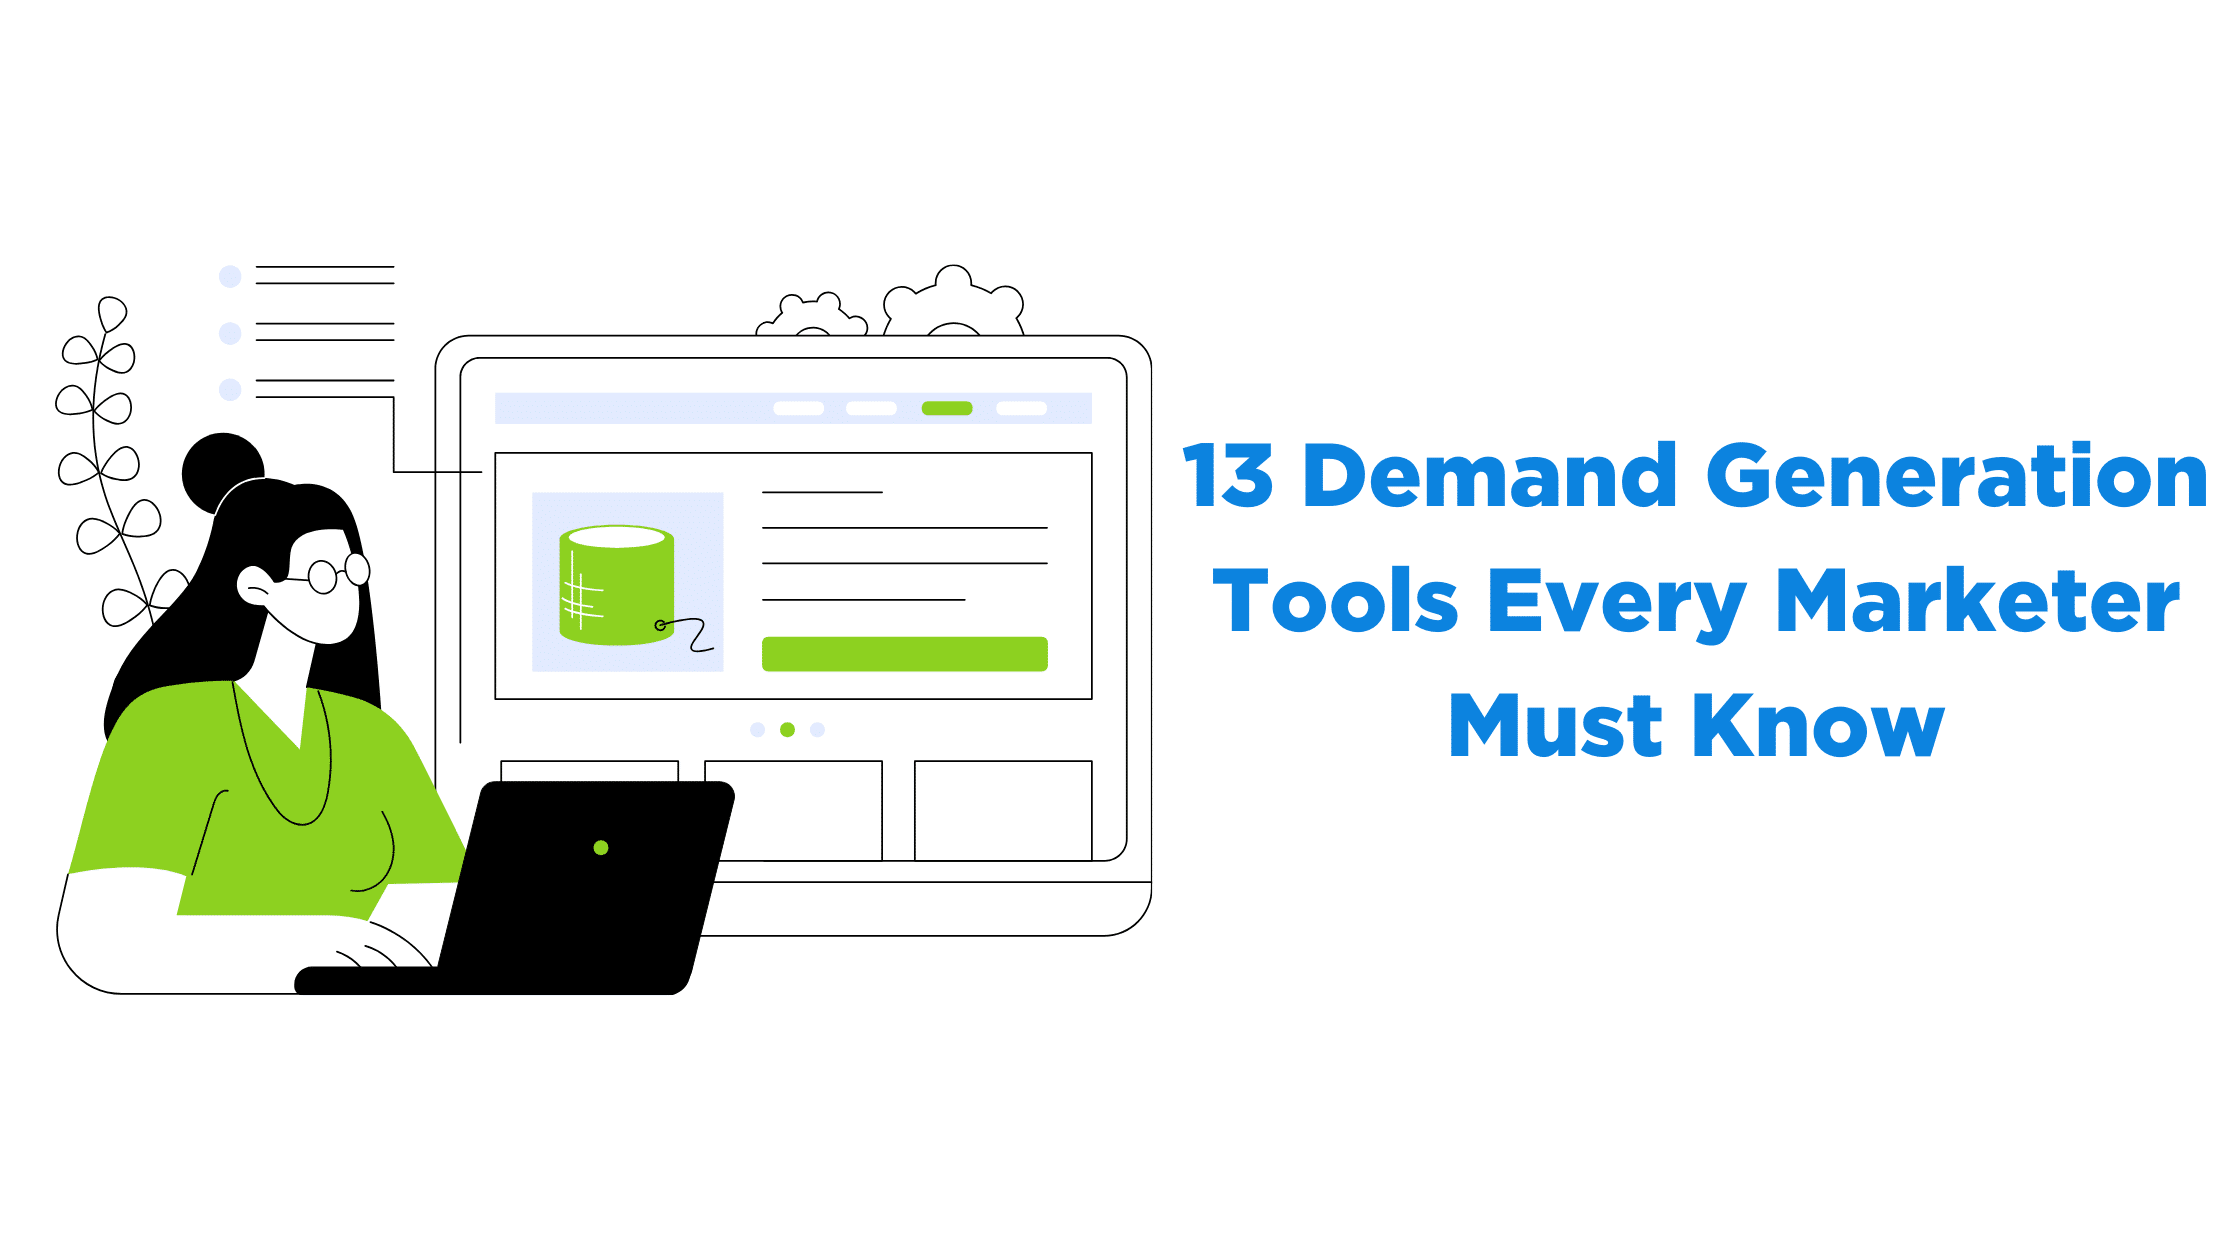 13 Demand Generation Tools Every Marketer Must Know